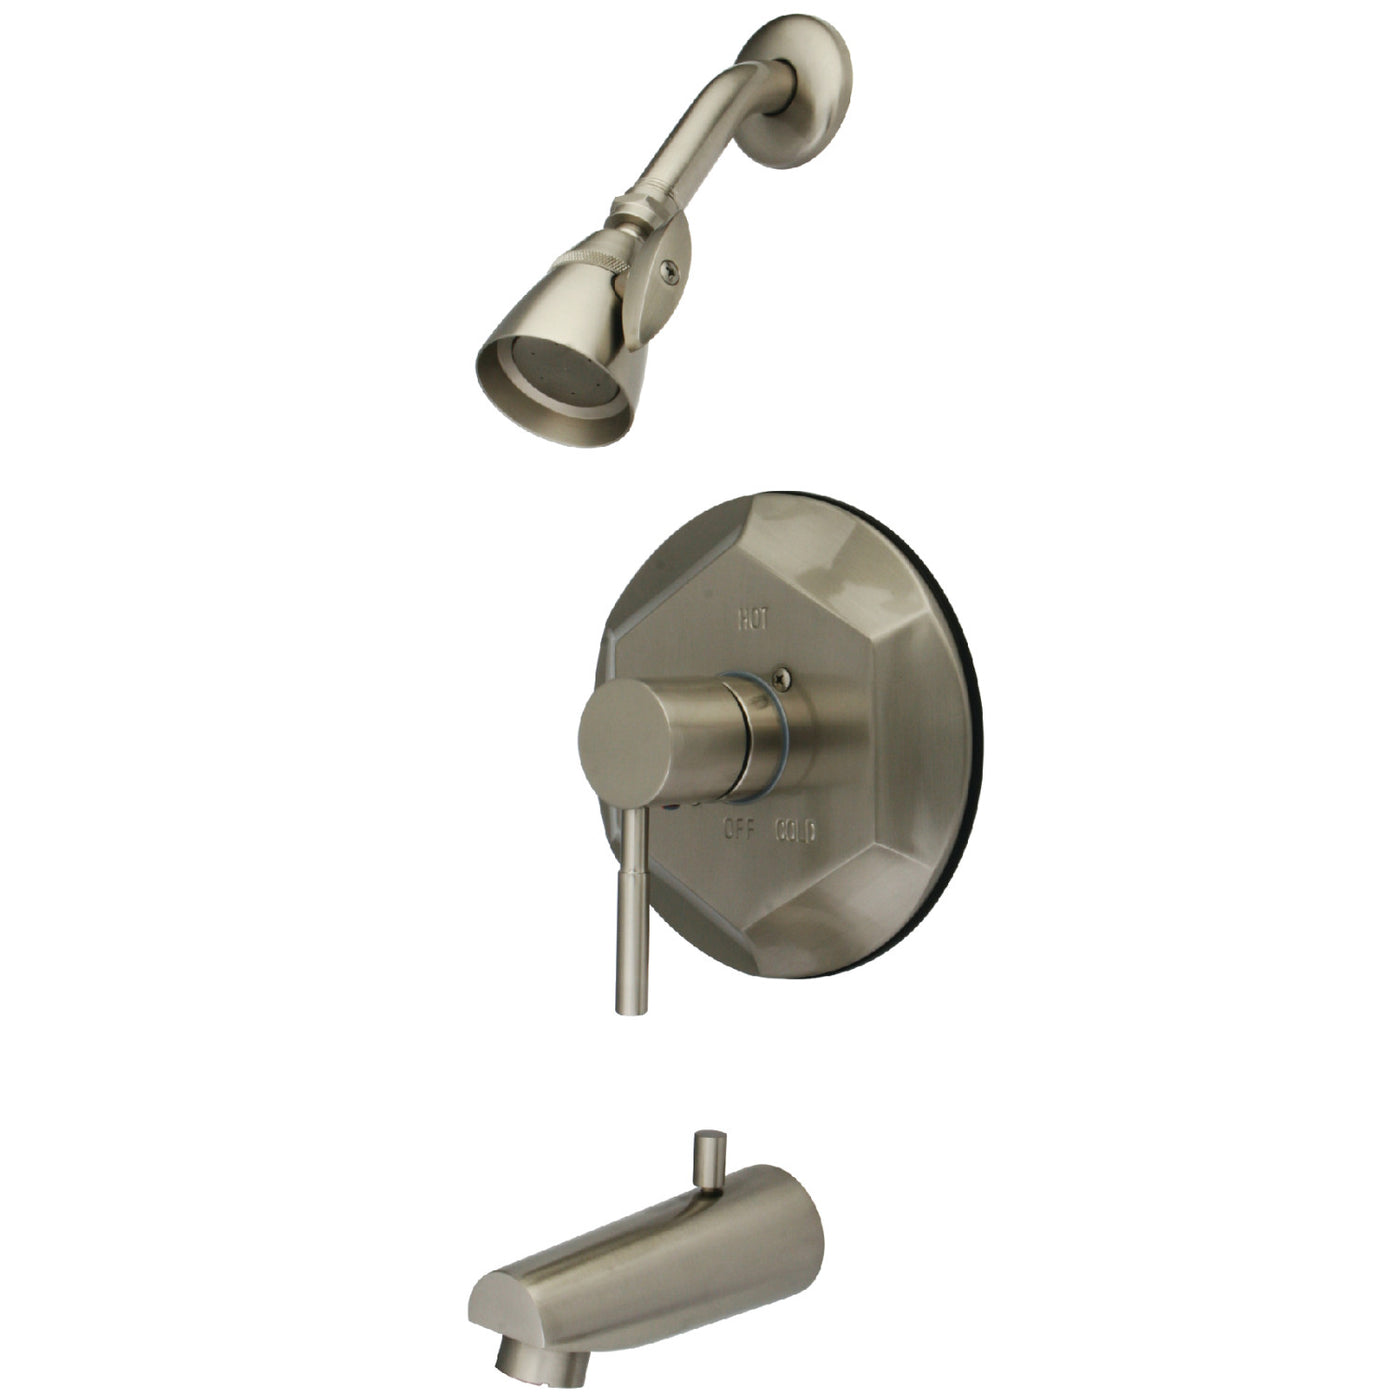 Elements of Design EB4638DL Tub and Shower Faucet, Brushed Nickel